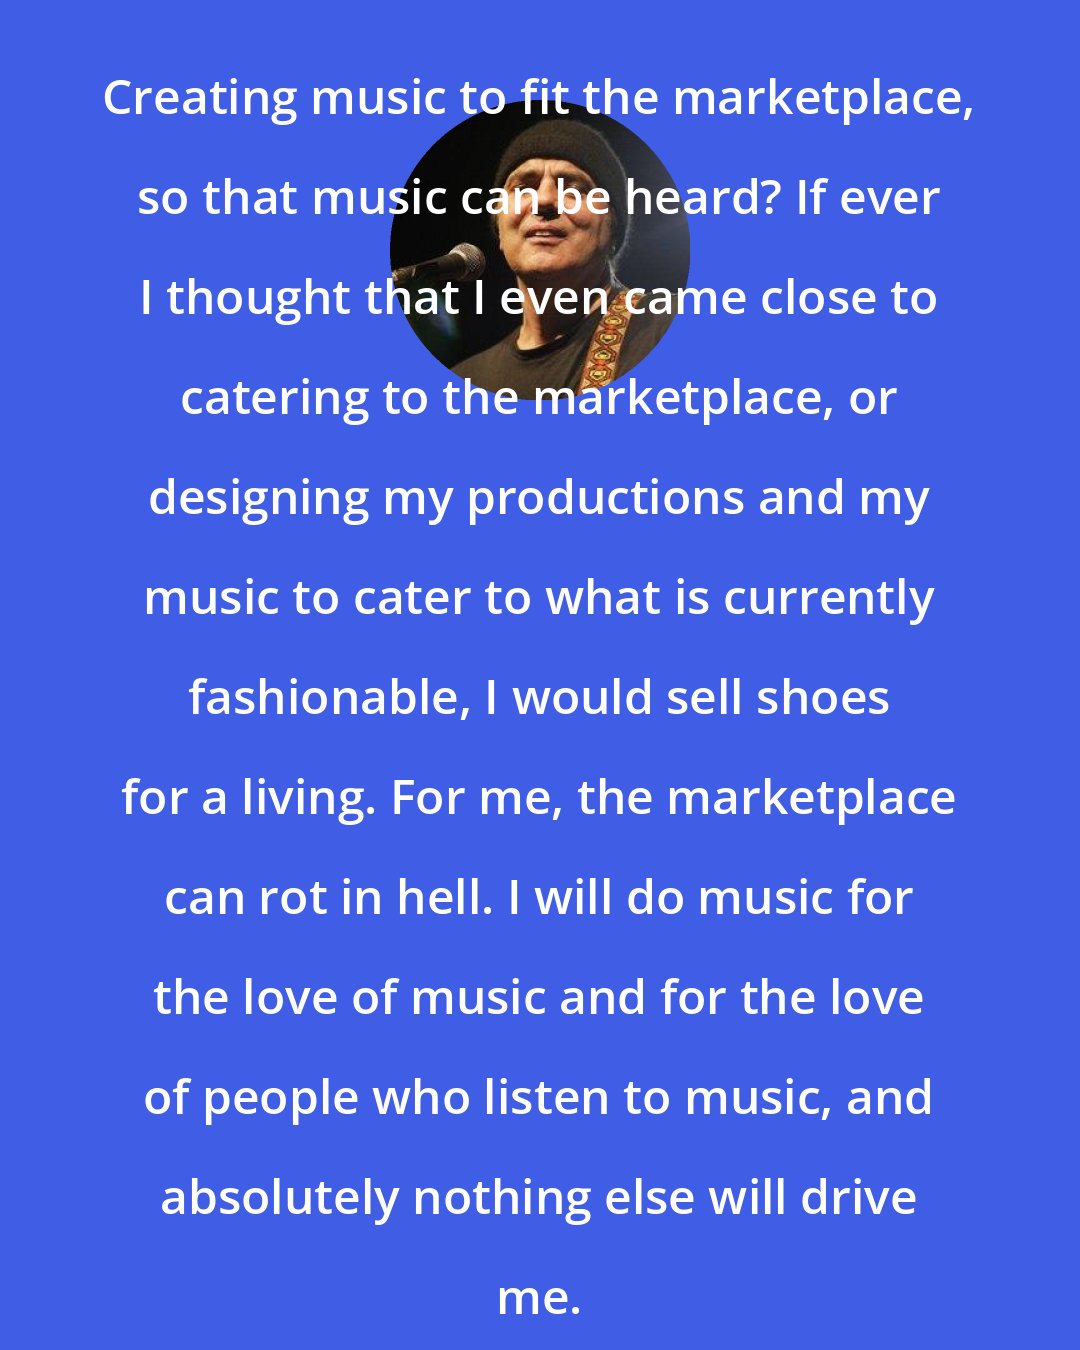 Daniel Lanois: Creating music to fit the marketplace, so that music can be heard? If ever I thought that I even came close to catering to the marketplace, or designing my productions and my music to cater to what is currently fashionable, I would sell shoes for a living. For me, the marketplace can rot in hell. I will do music for the love of music and for the love of people who listen to music, and absolutely nothing else will drive me.